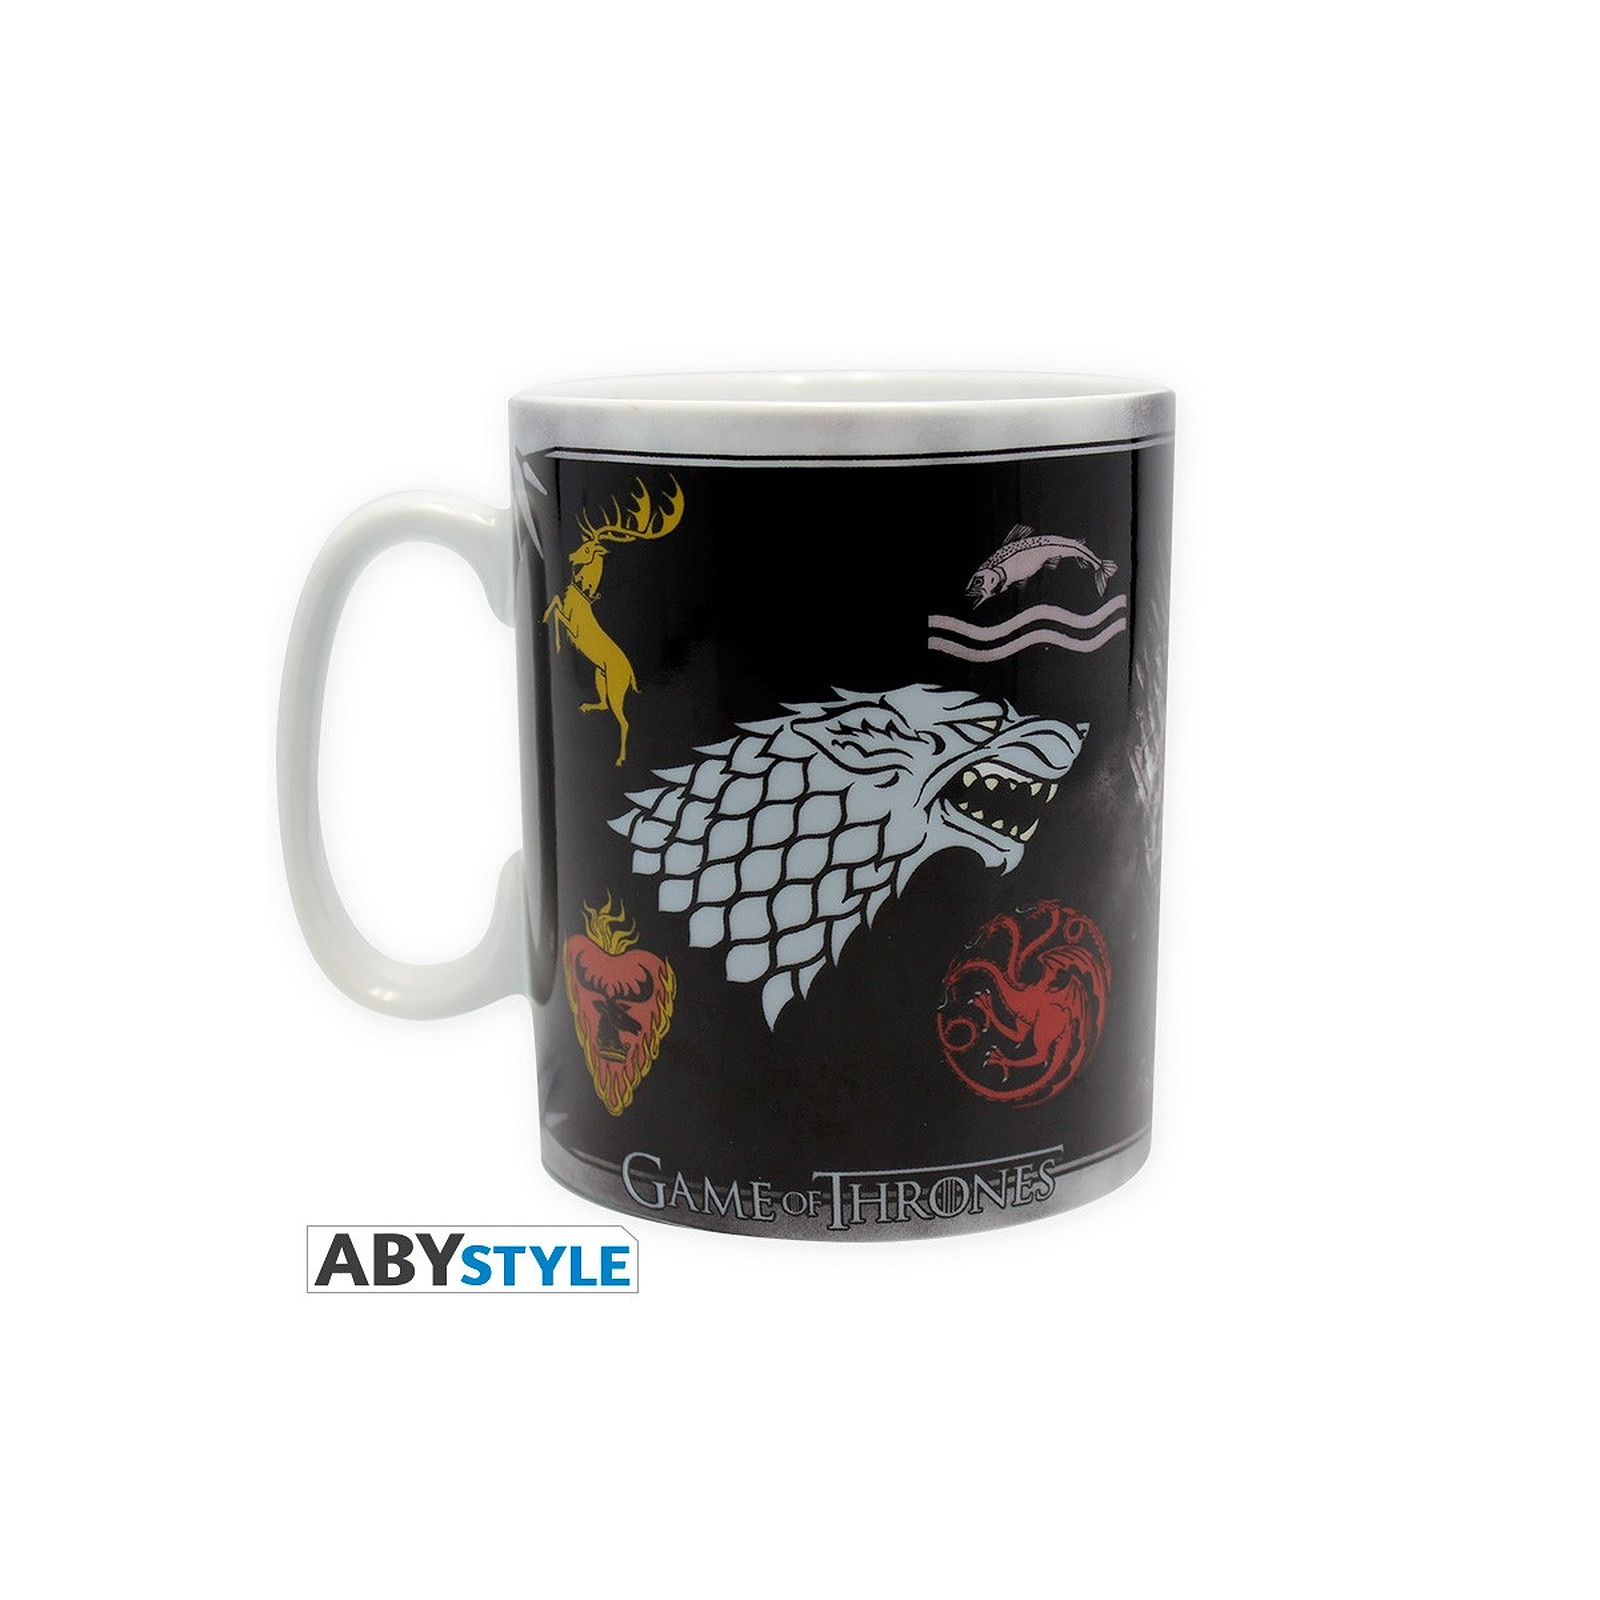 GAME OF THRONES - Mug - 460 ml - Sigles & Trone - porcl. avec boite - Mugs Abystyle